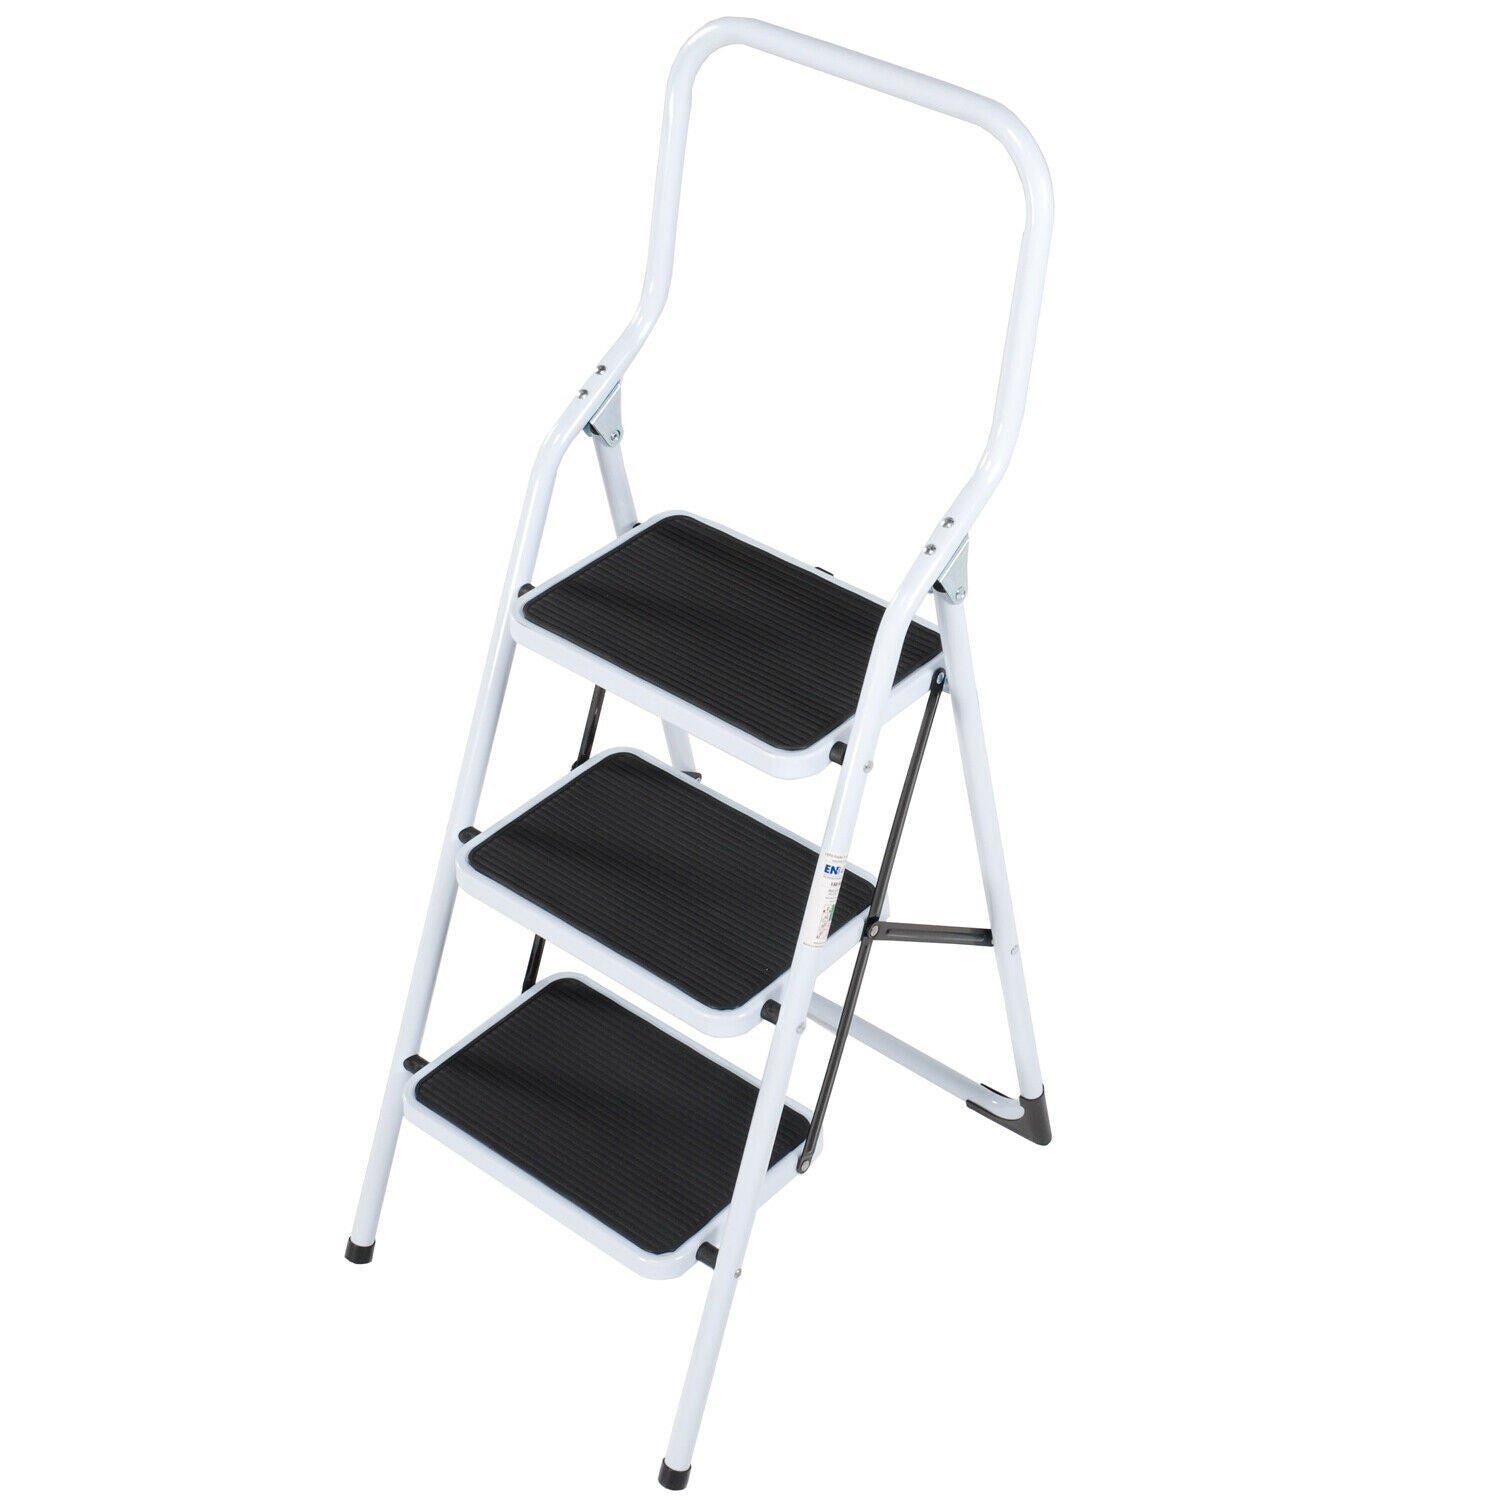 0.75m Folding Step Ladder Safety Stool 3 Tread Compact Anti Slip Rubber Steps